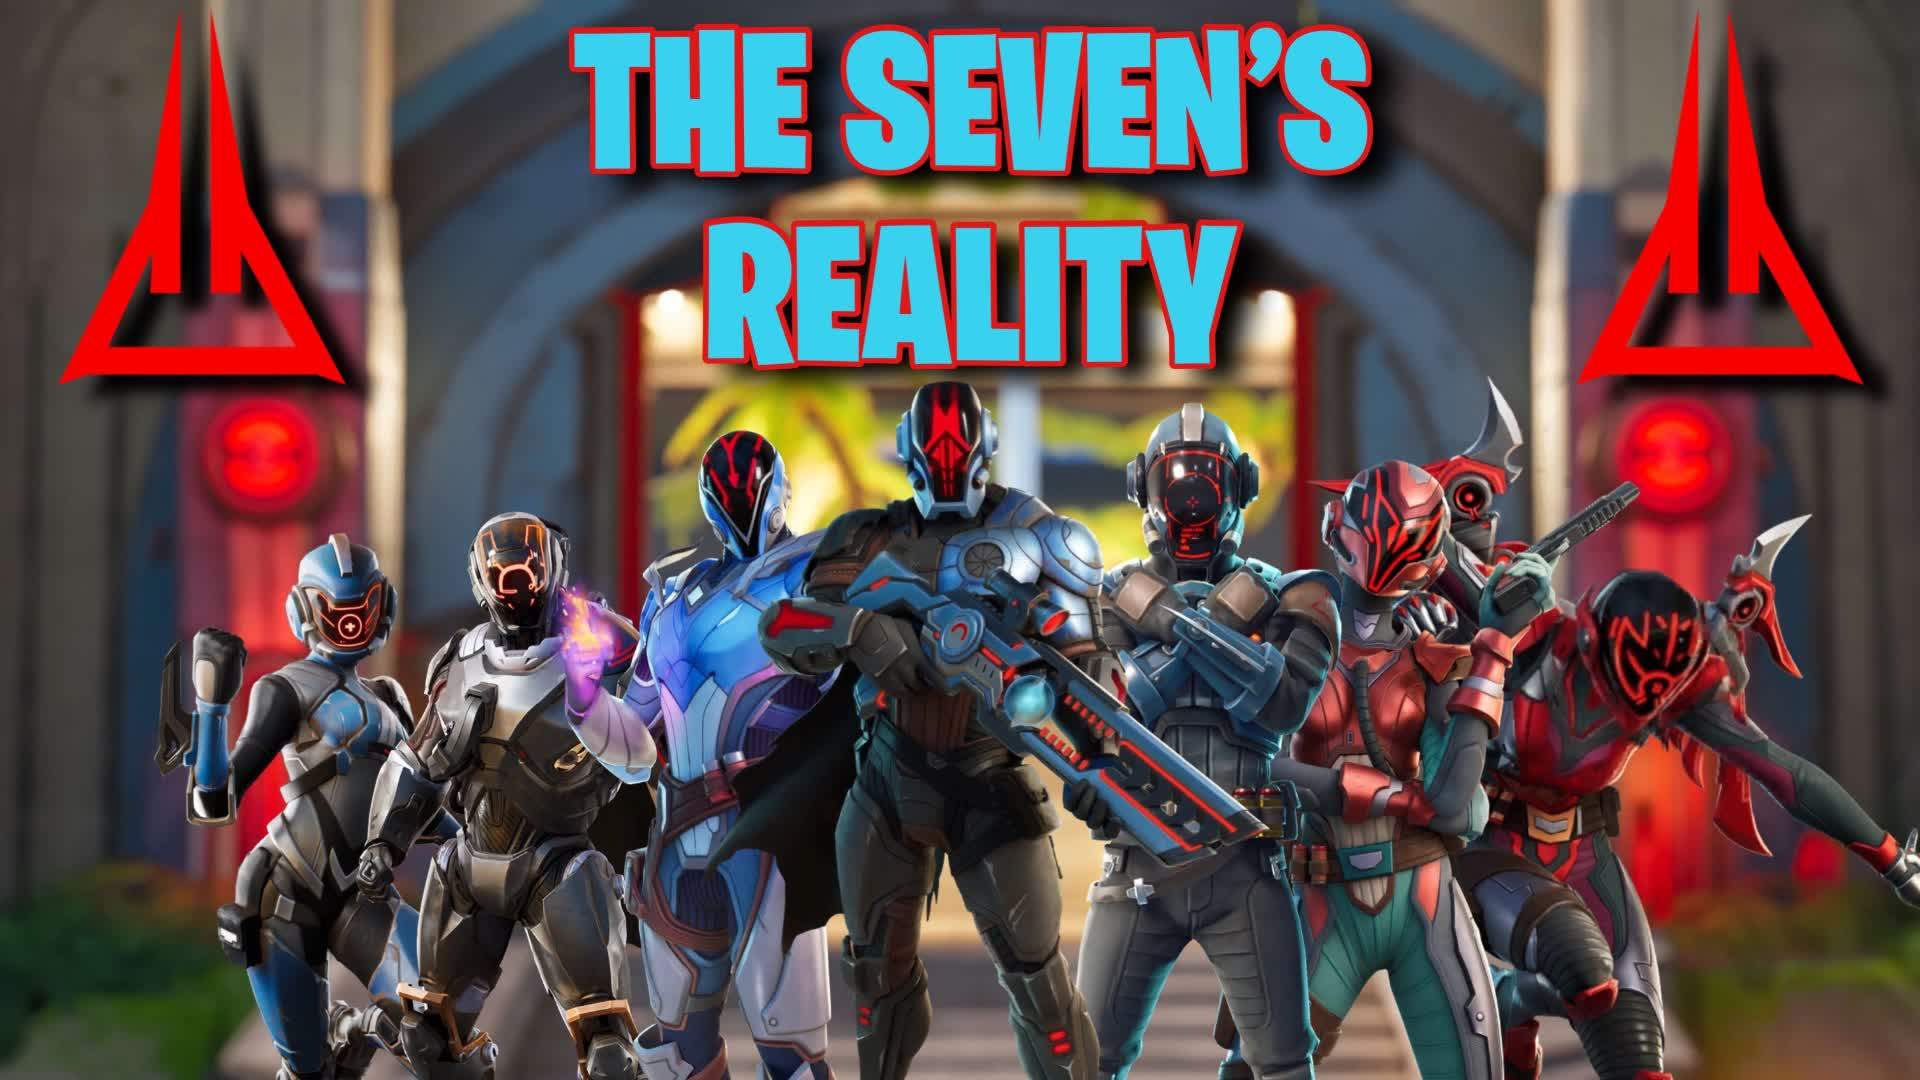 The Seven's Reality